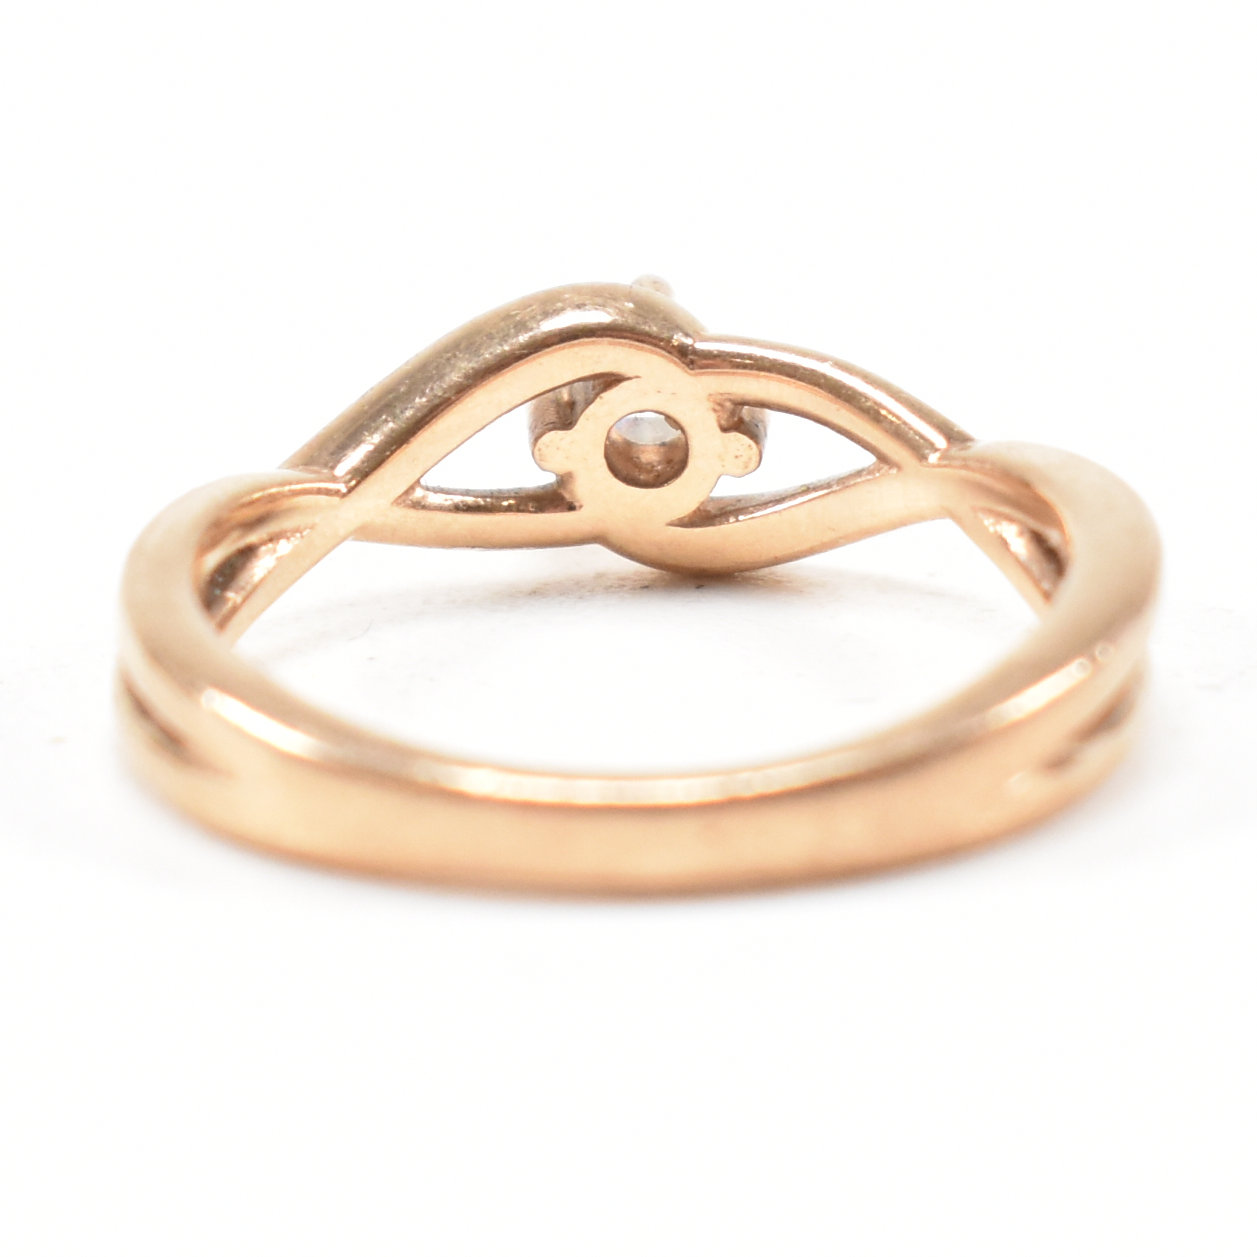 HALLMARKED 9CT ROSE GOLD & WHITE STONE SOLITAIRE CROSSOVER RING - Image 5 of 9